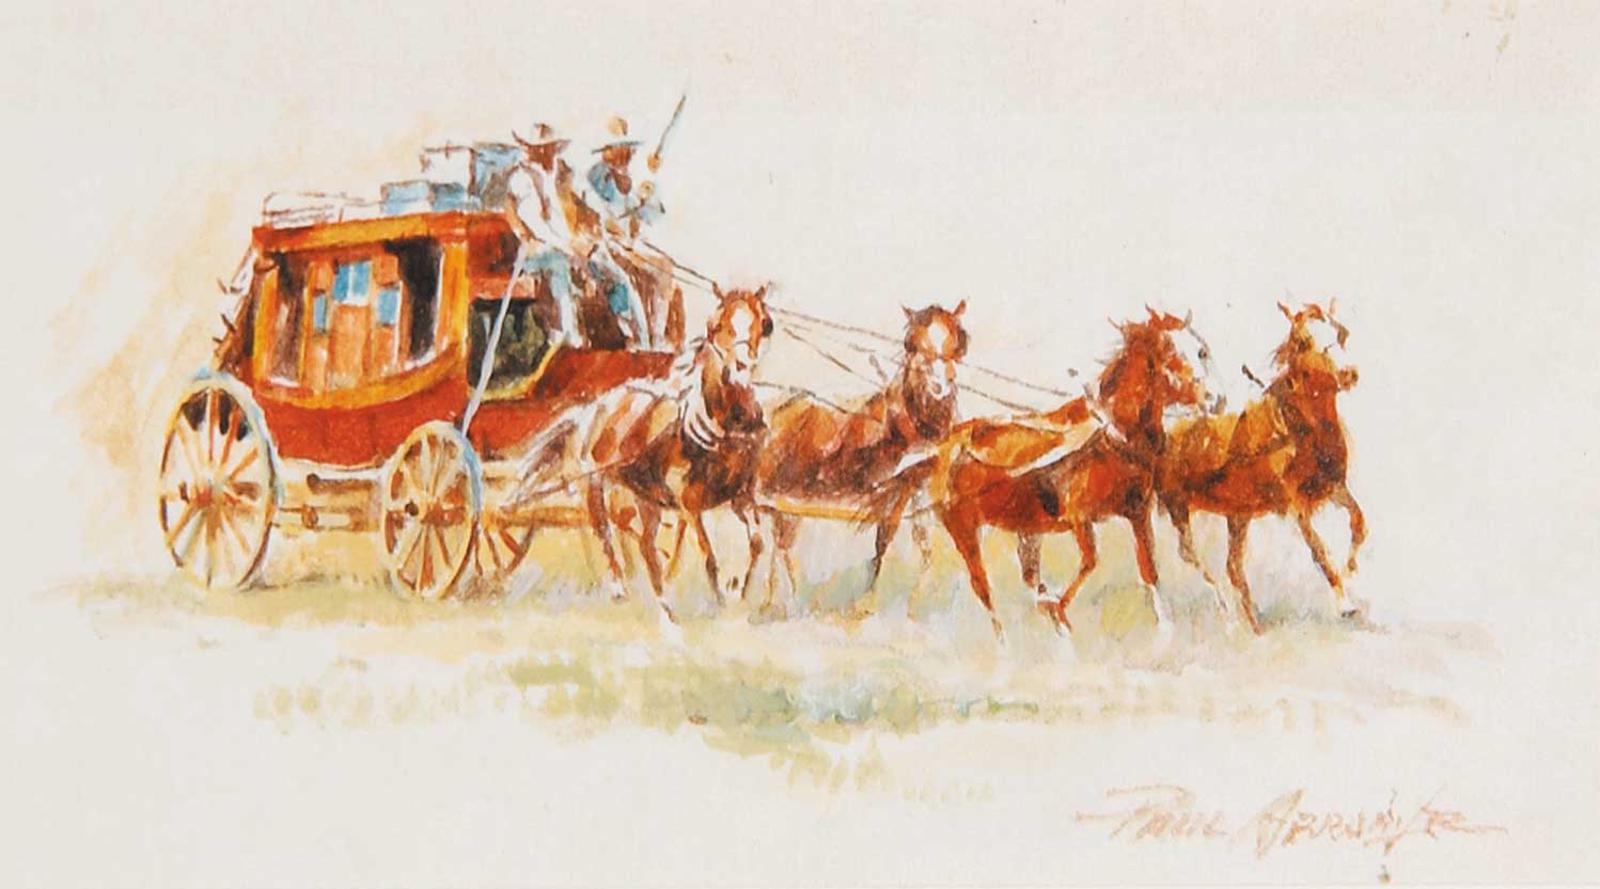 Paul Jr. Abram - Untitled - Orange Coach and Four Driving Right